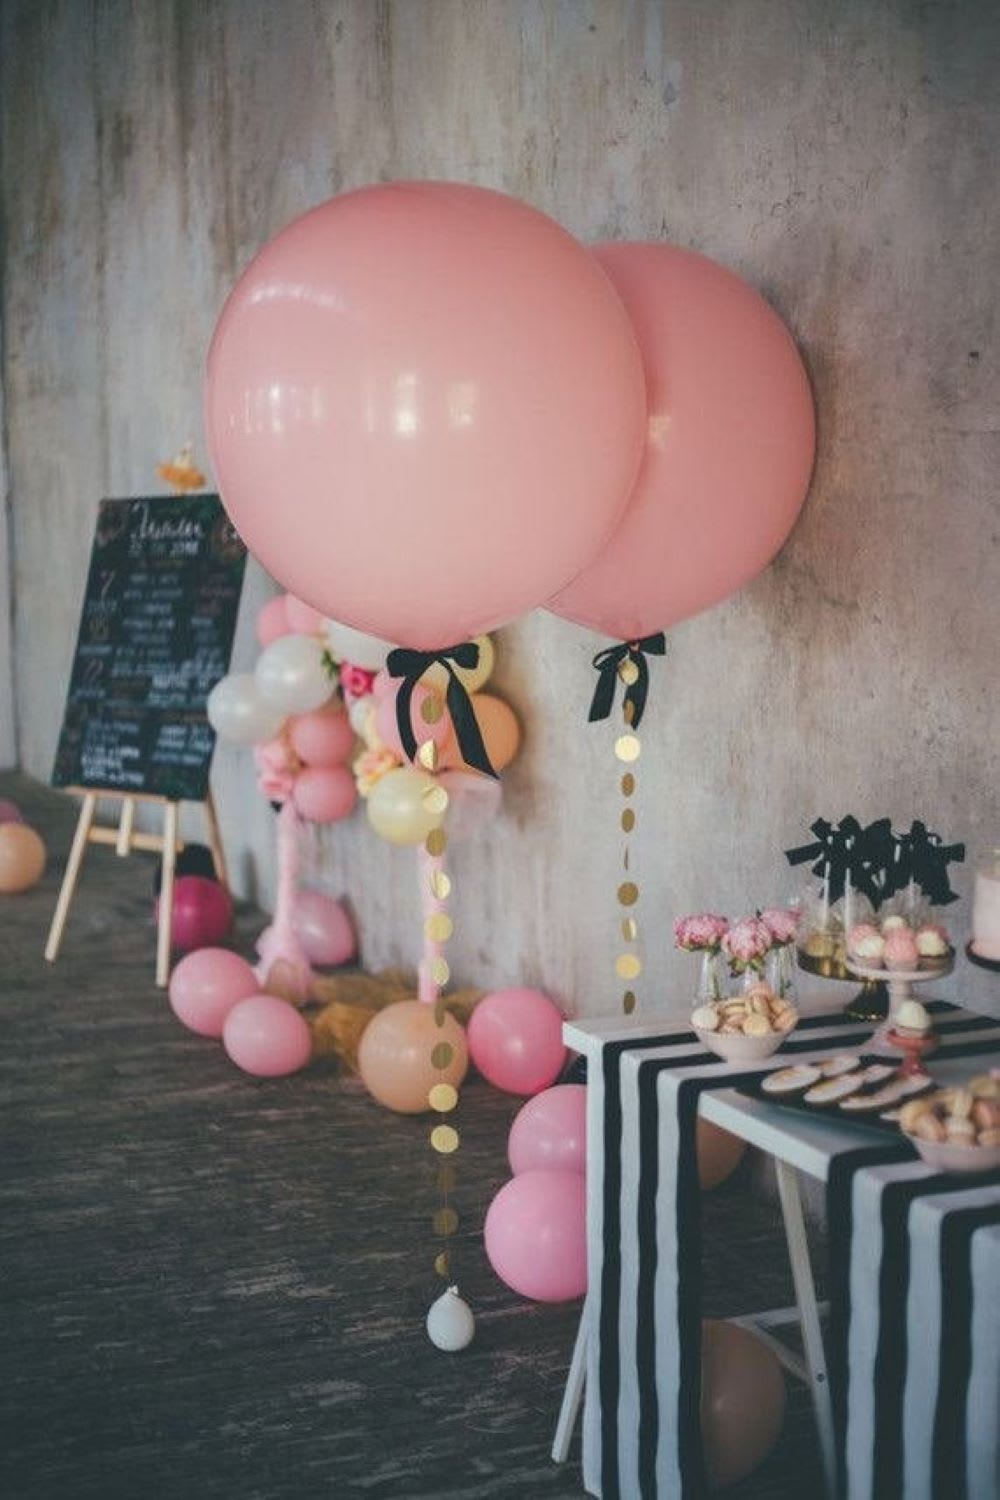 5 Easy Ideas For Chic Bridal Shower Decorations | A Practical Wedding